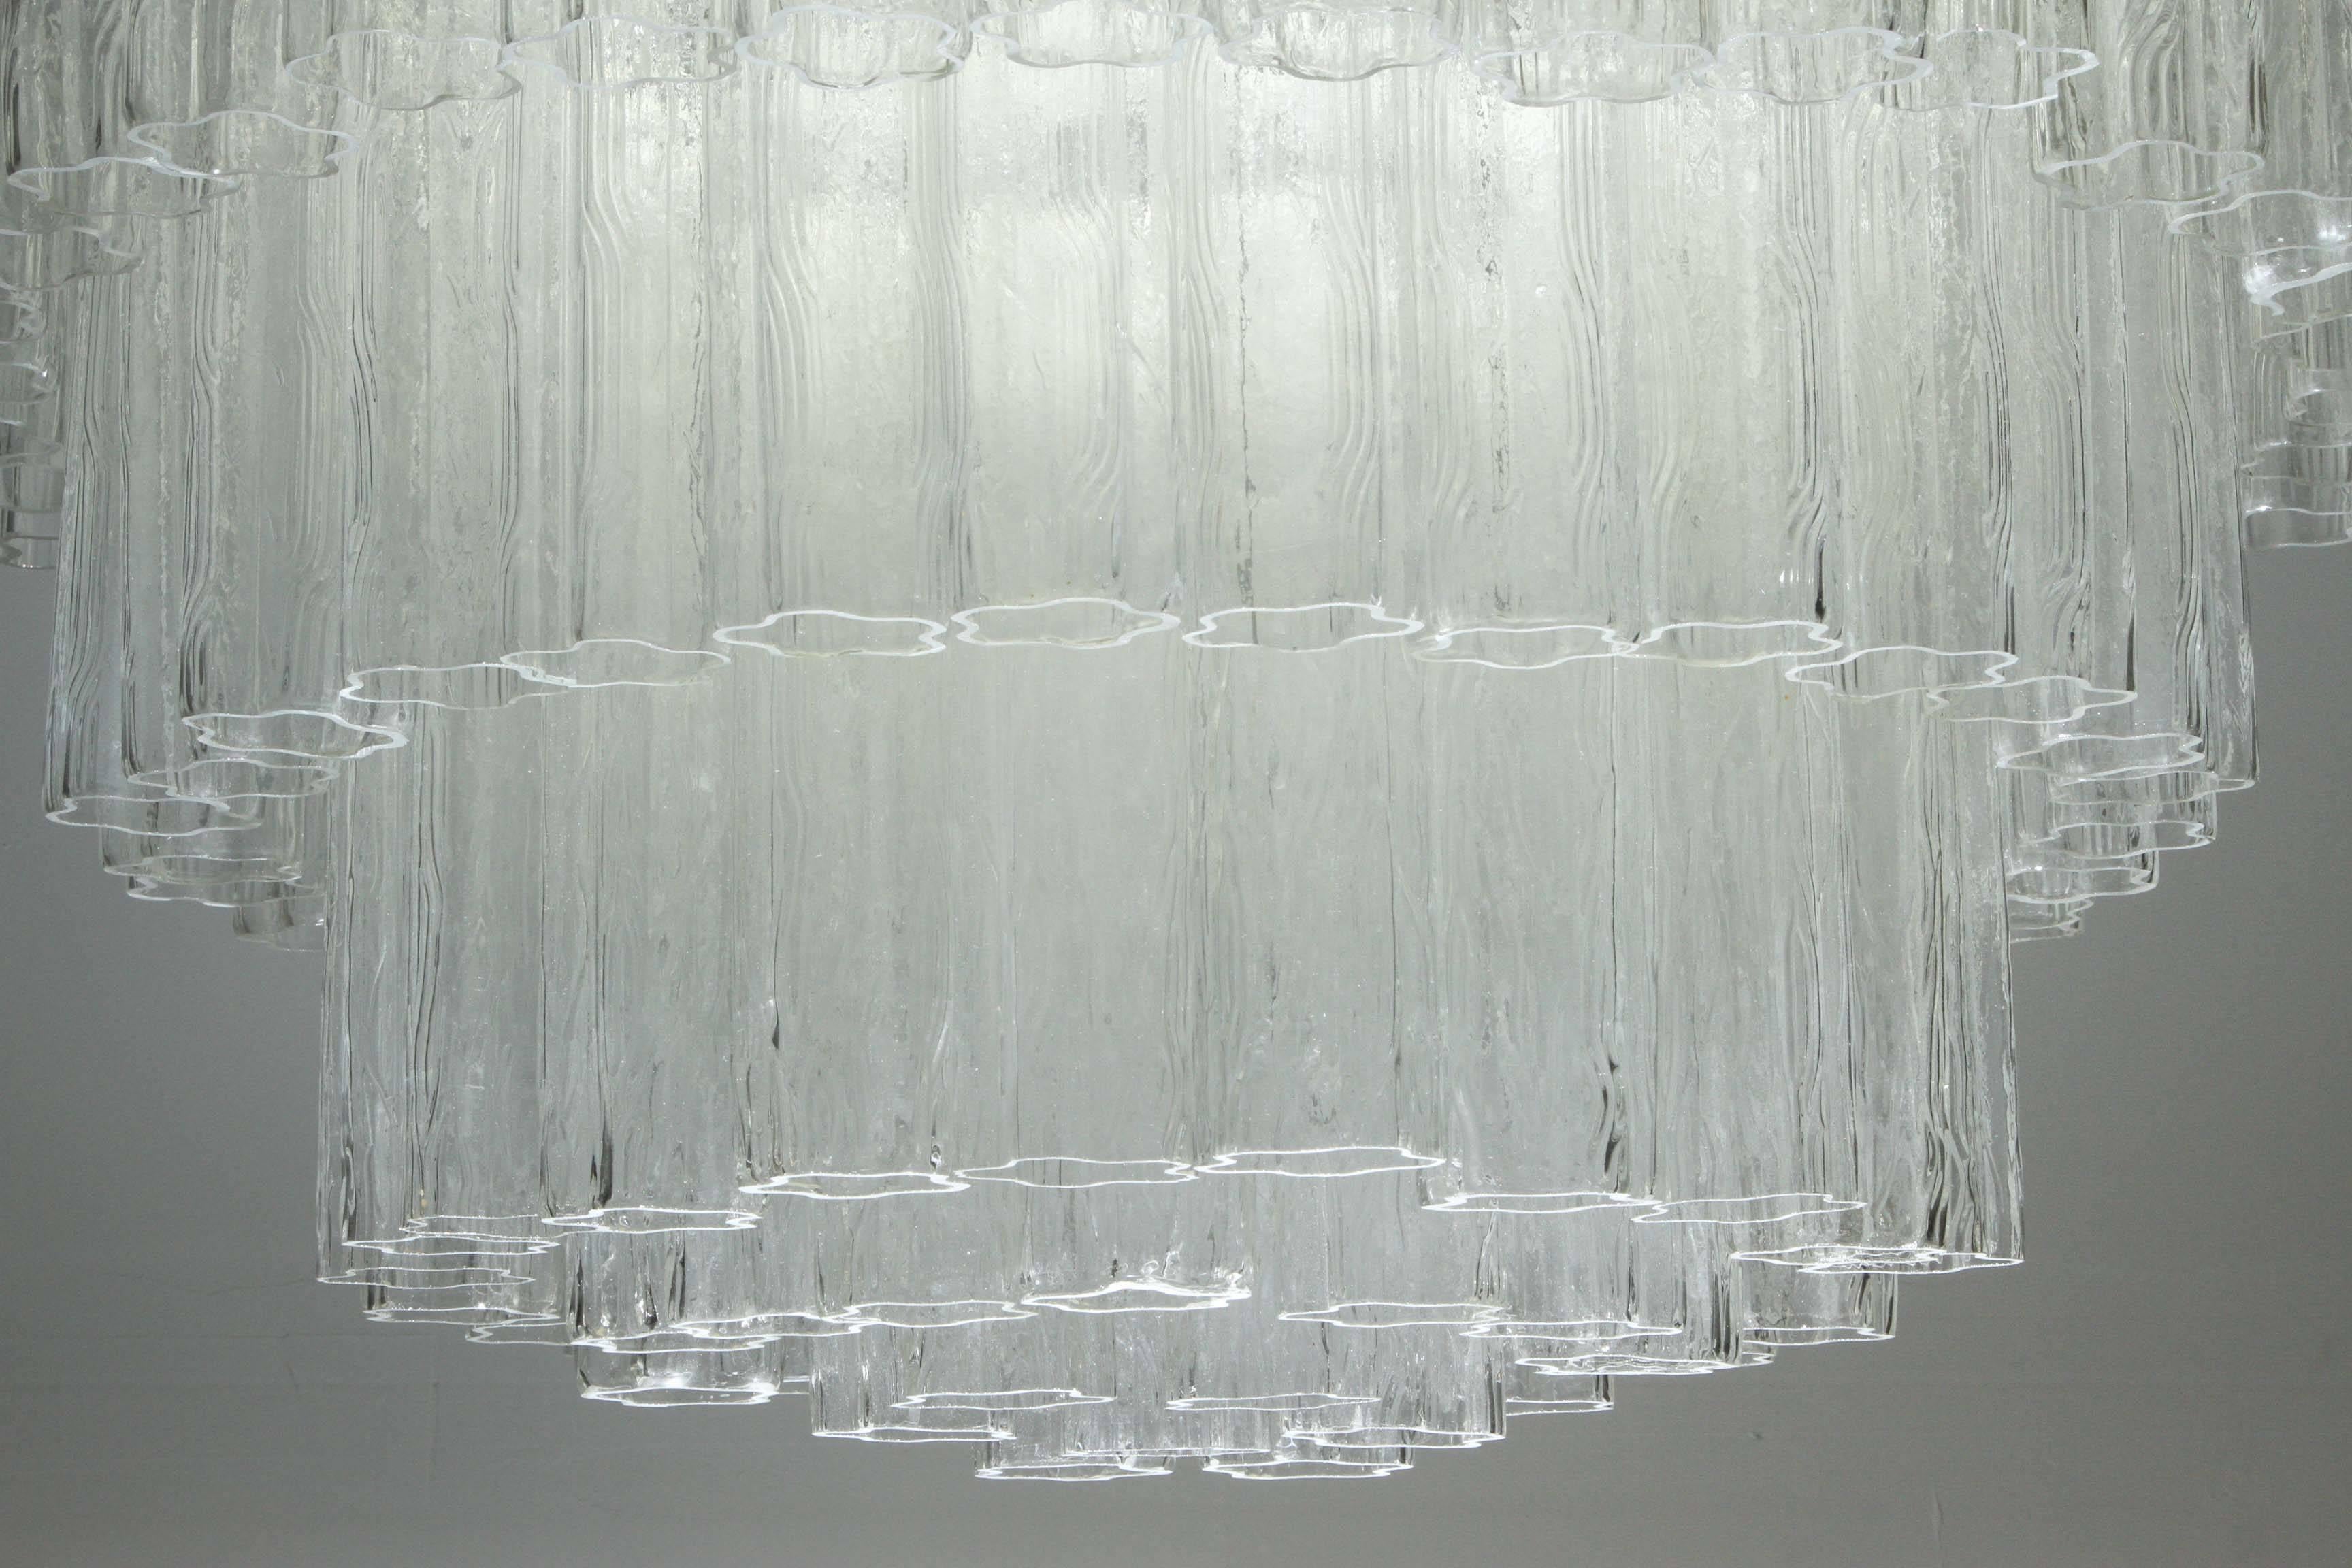 Large five-tier Tronchi tube chandelier by Camer Lighting Company.
The polished chrome armature supports 110 large clear glass tubes which have a slightly textured effect to create an impressive "ICE" like effect chandelier.
It comes